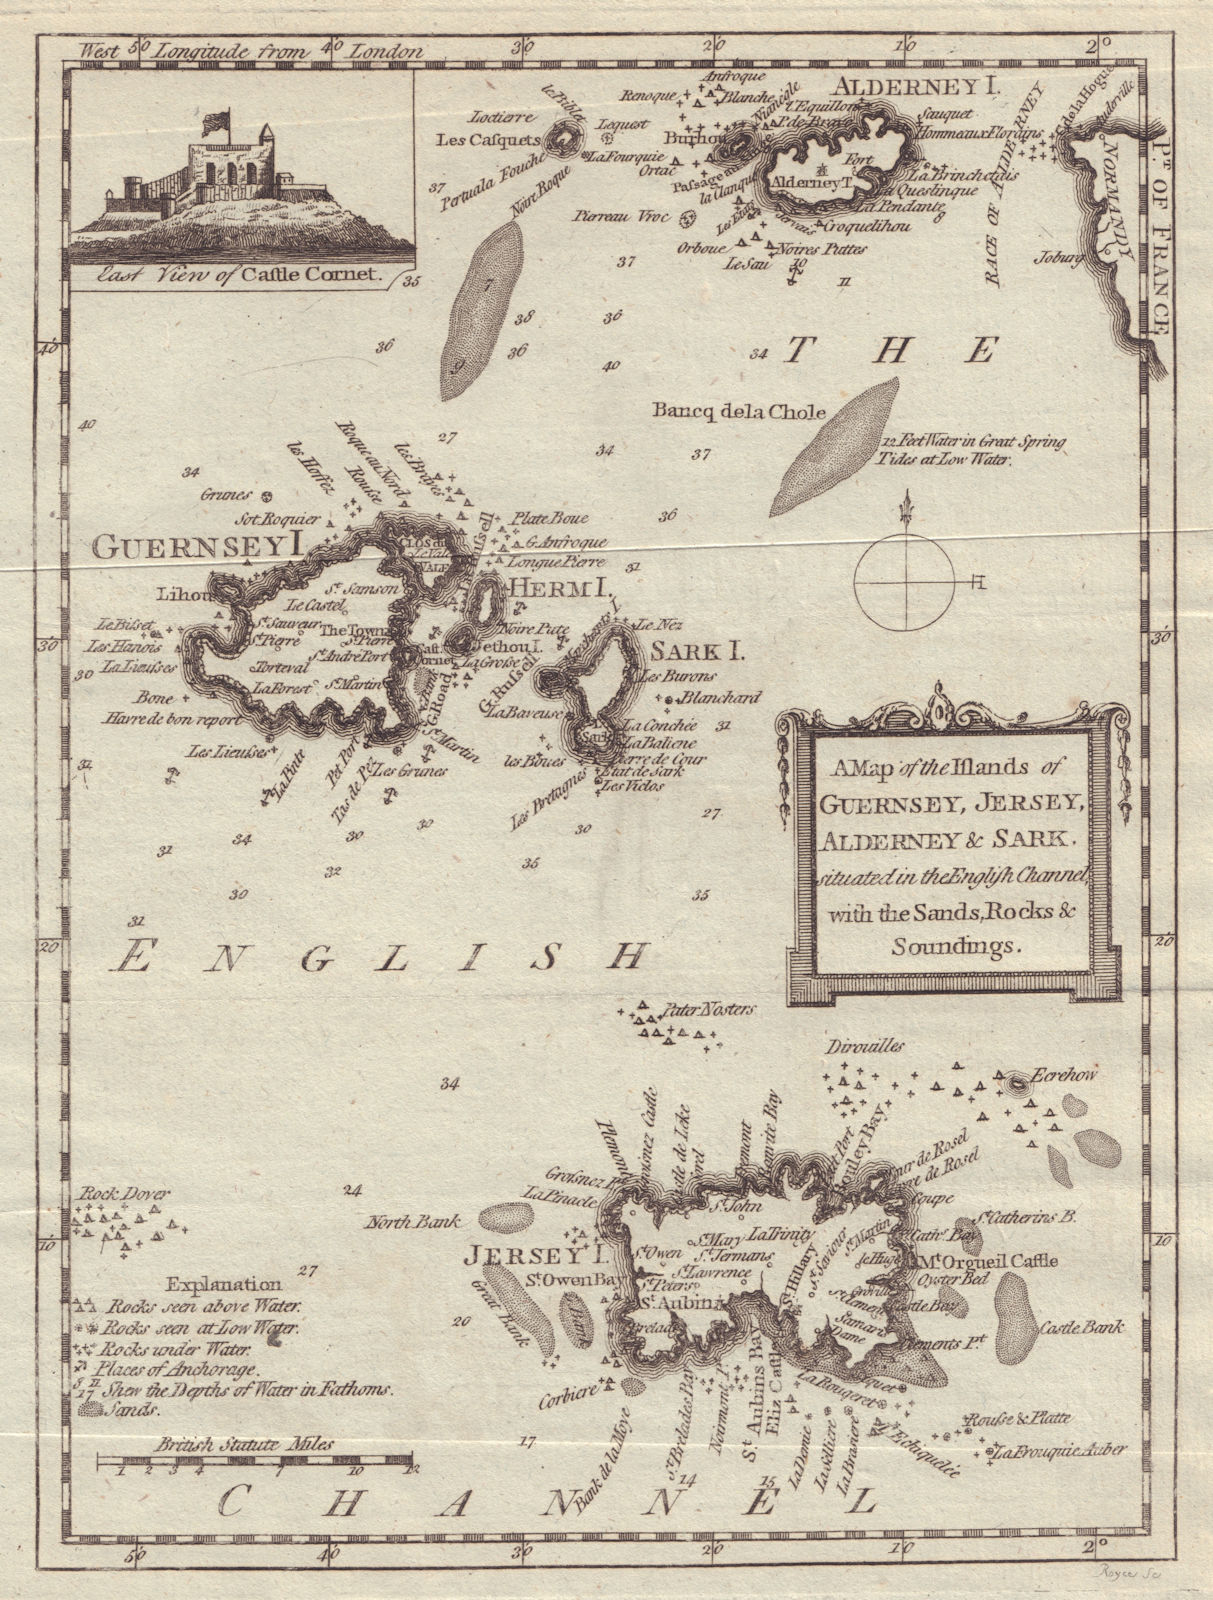 Associate Product The [Channel] Islands of Guernsey, Jersey, Alderney & Sark… GENTS MAG 1779 map